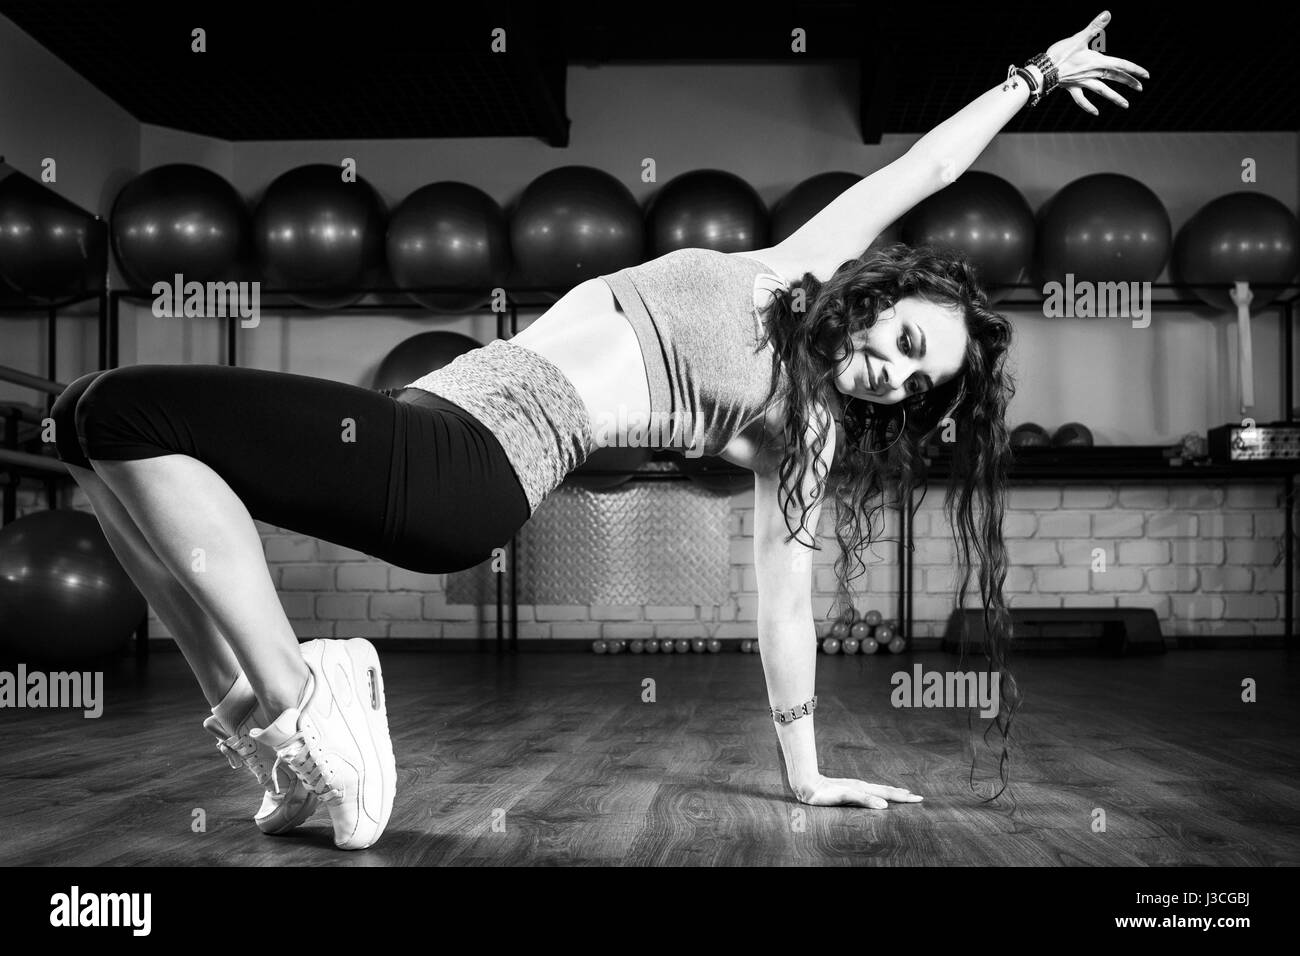 Fitness girl dancing zumba workout in gym. Weight loss activity exercises Stock Photo